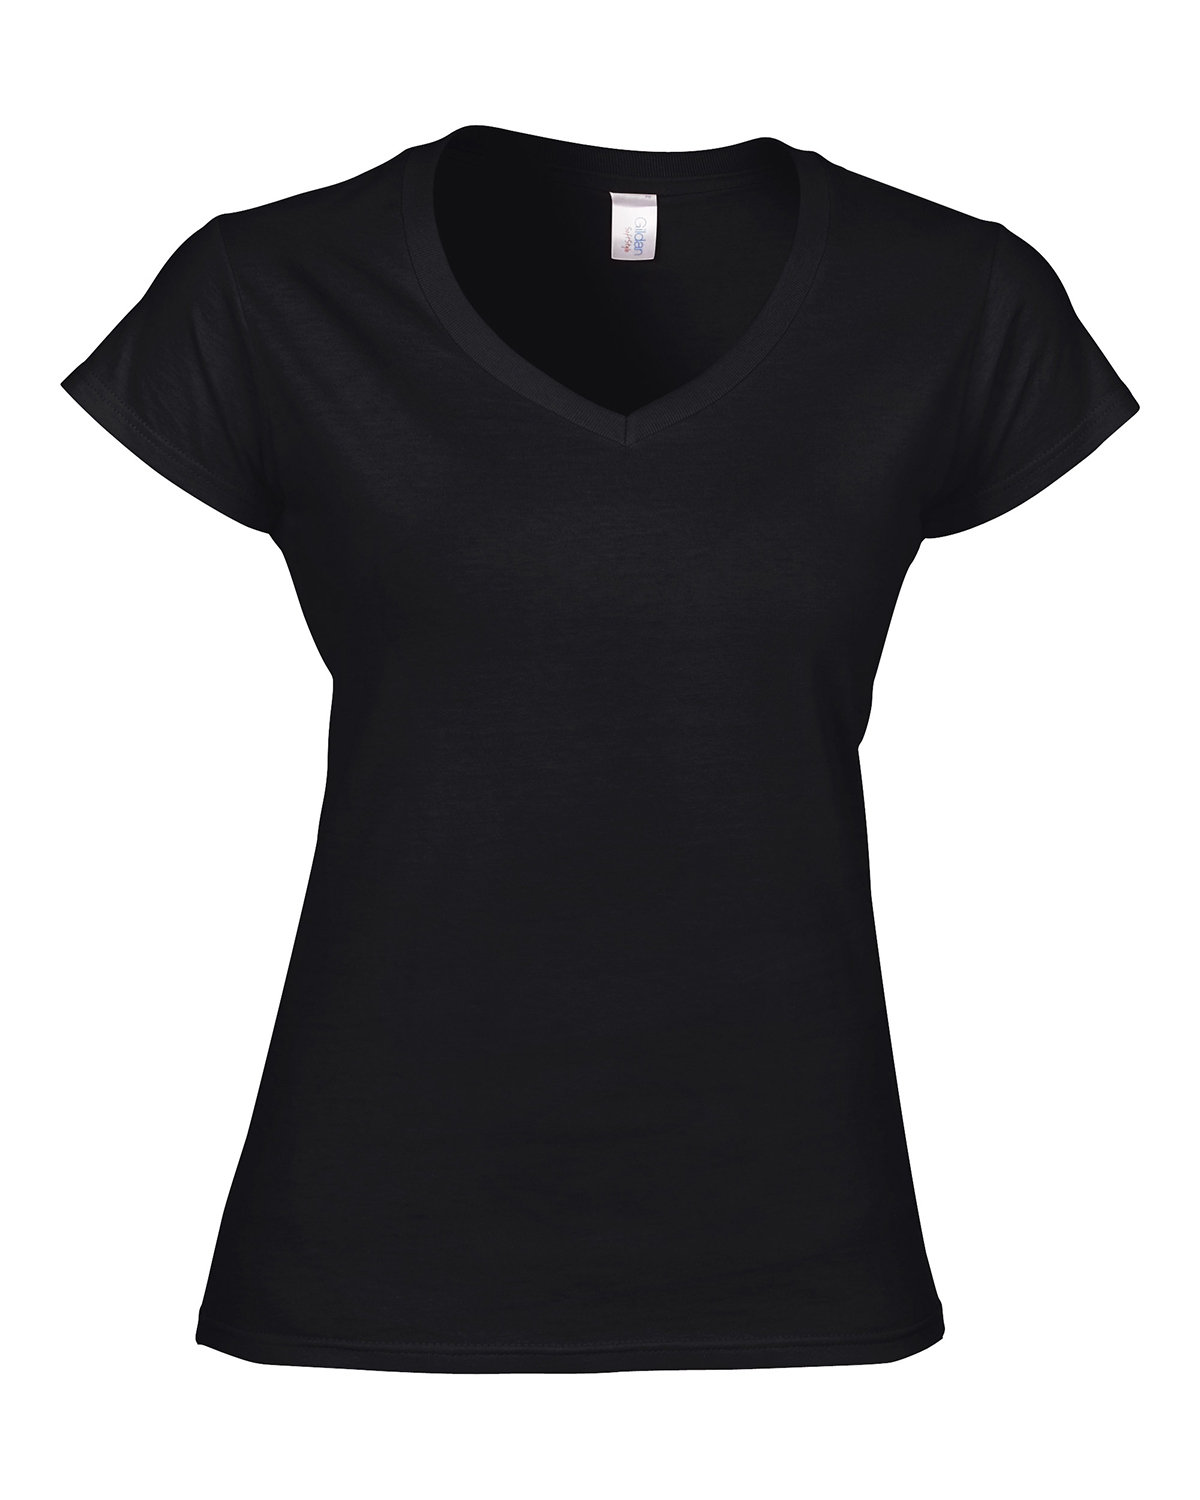 Gildan Ladies' SoftStyle® Fitted V-Neck T-Shirt | alphabroder